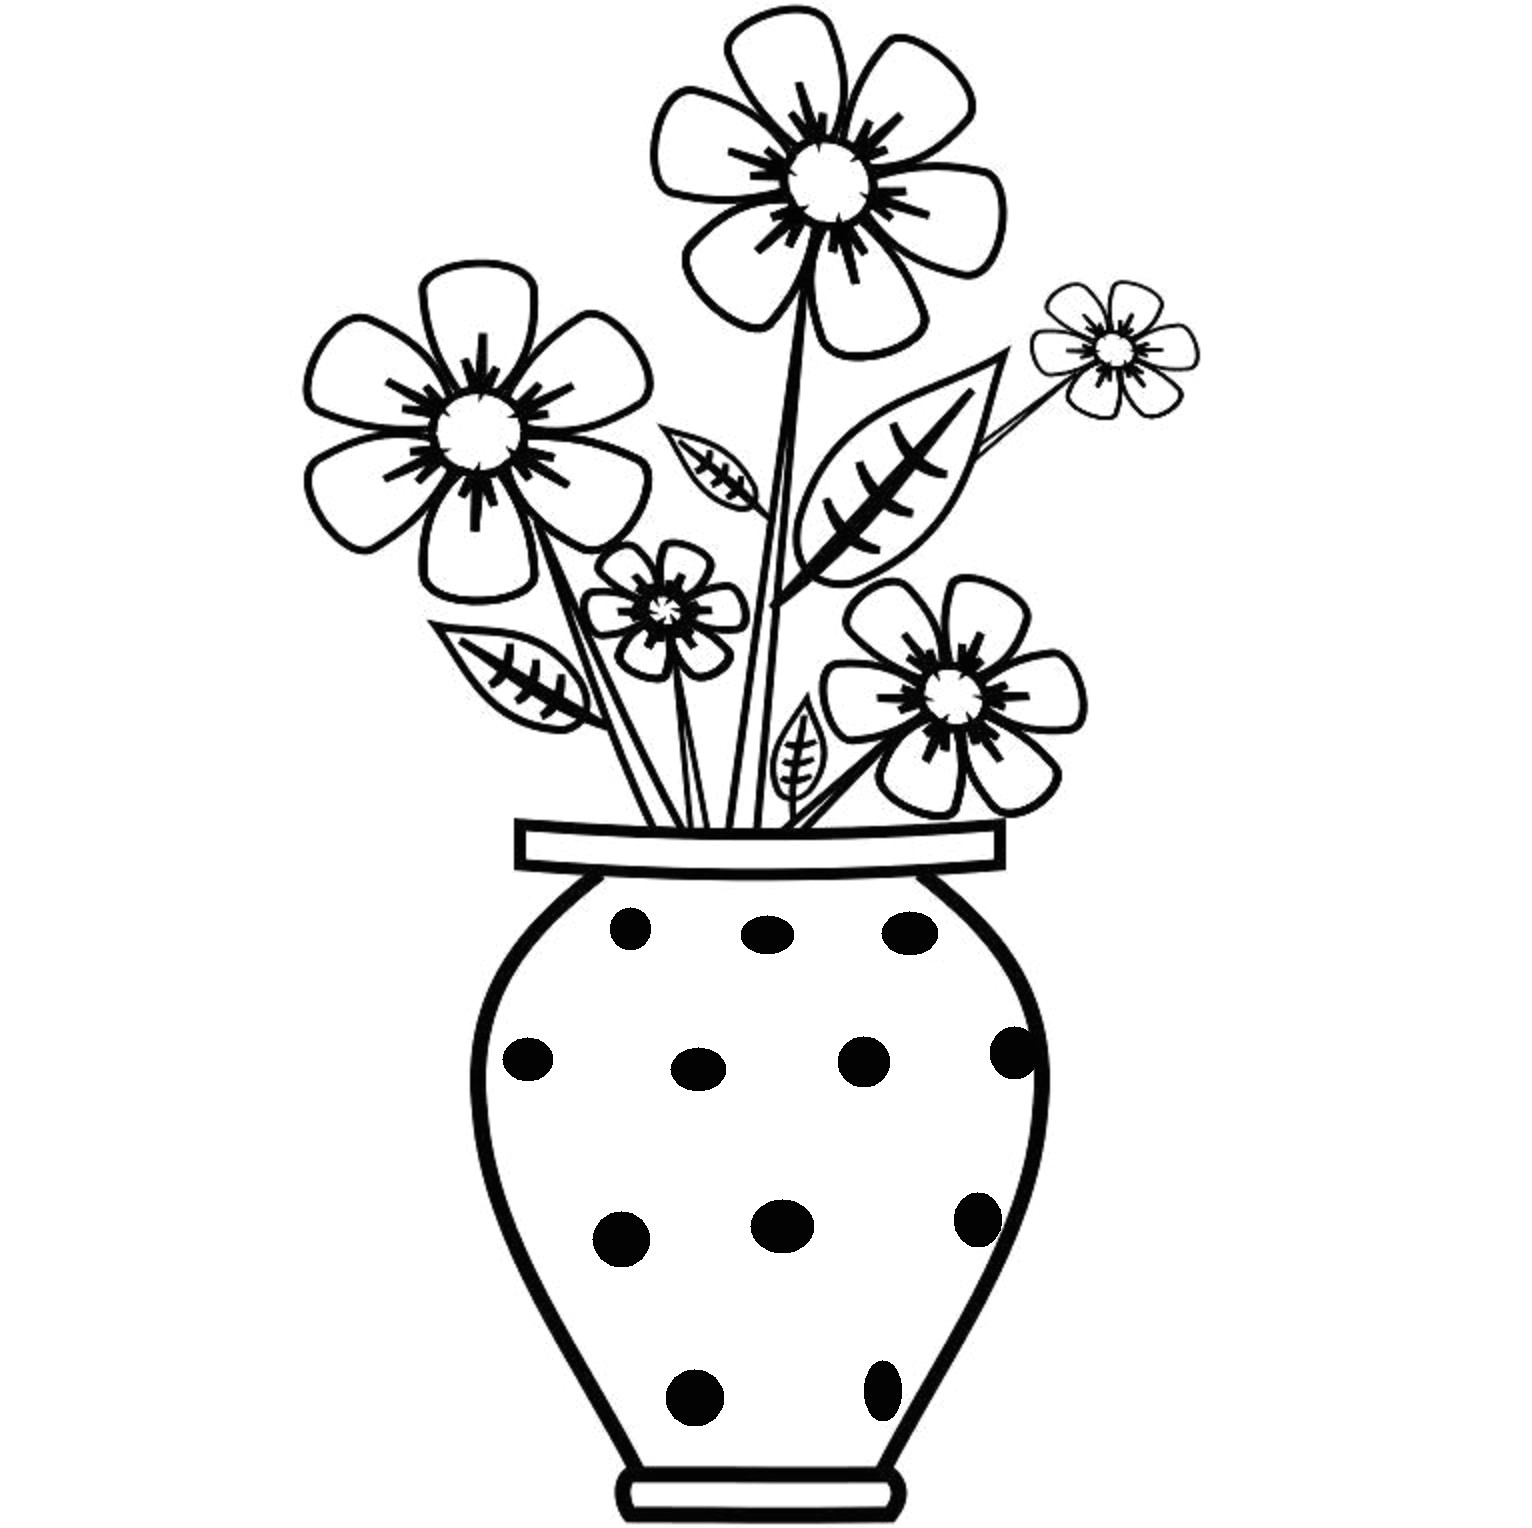 Drawings Easy Weed How to Draw A Easy Flower for Beginners Flower Pot for Drawing